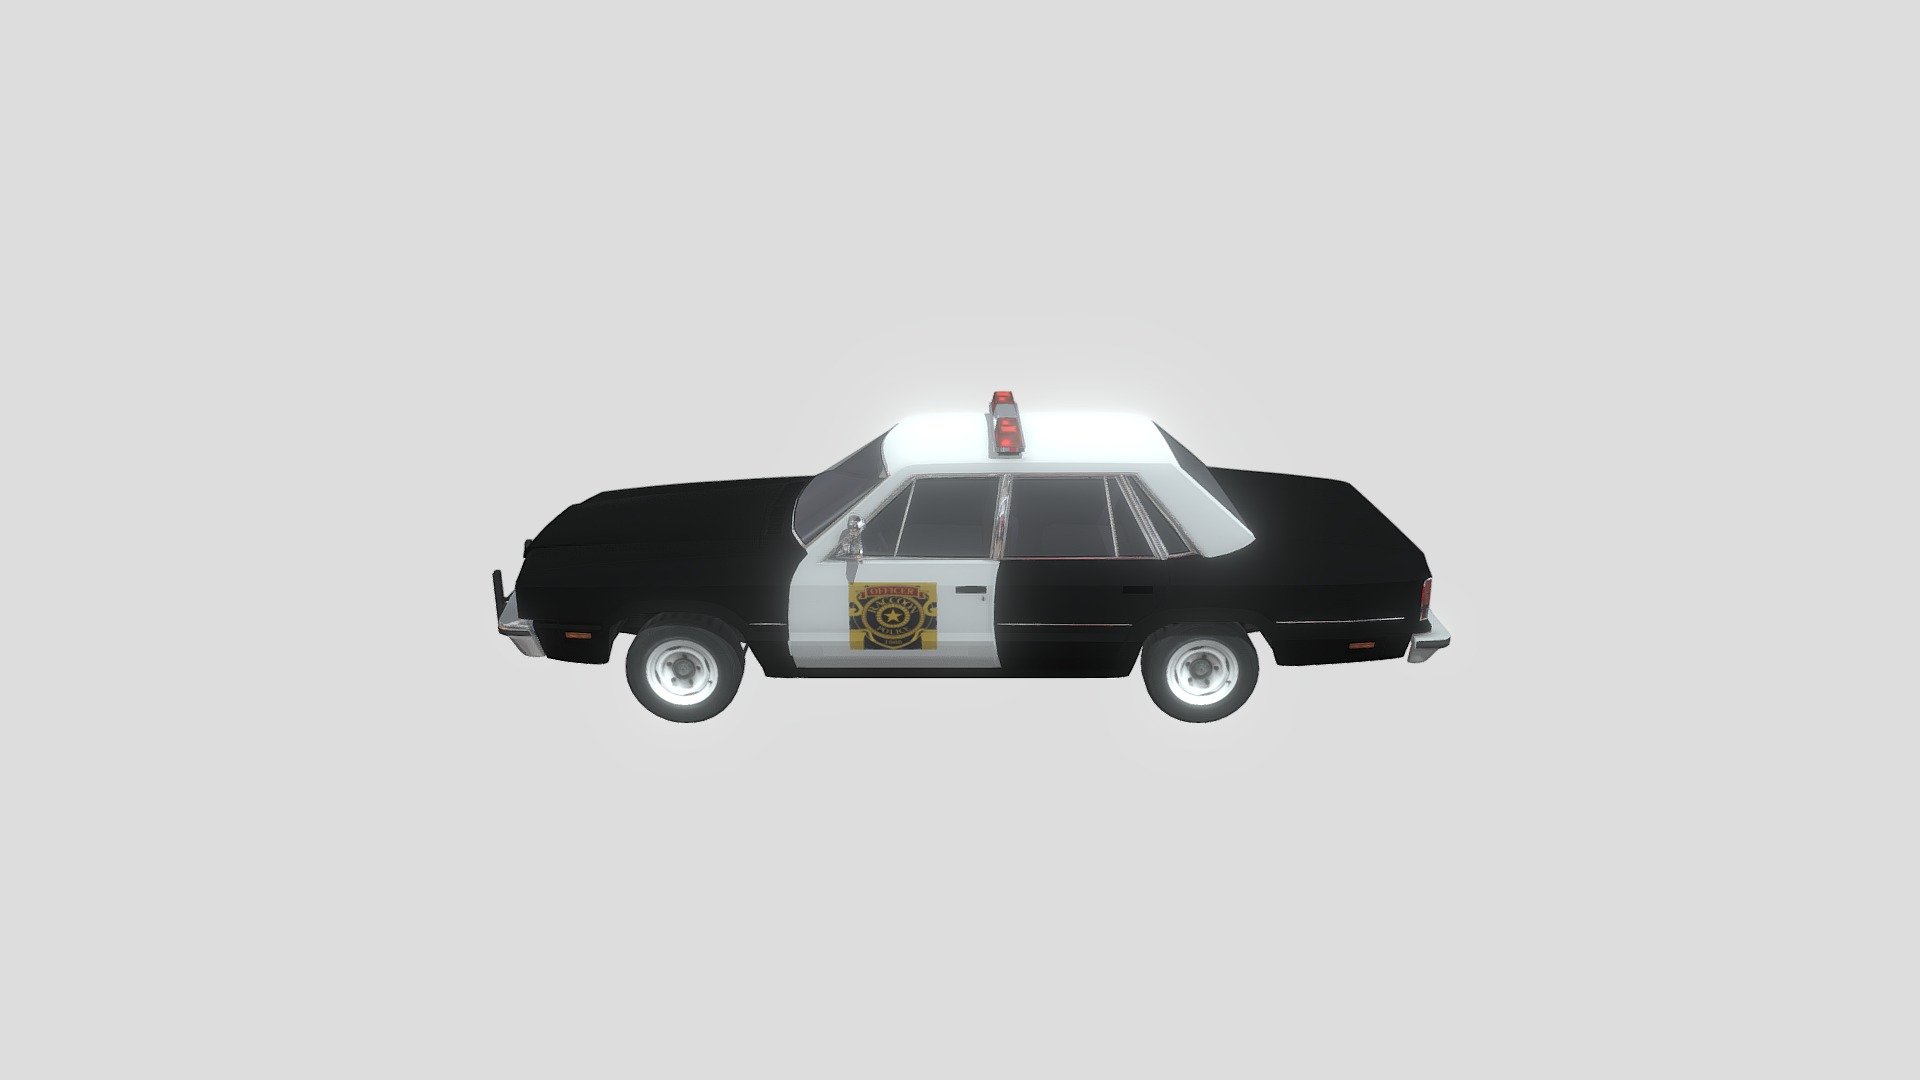 Racoon City Police Car (Resident Evil 2) - 3D model by PakitoHoe 3d model